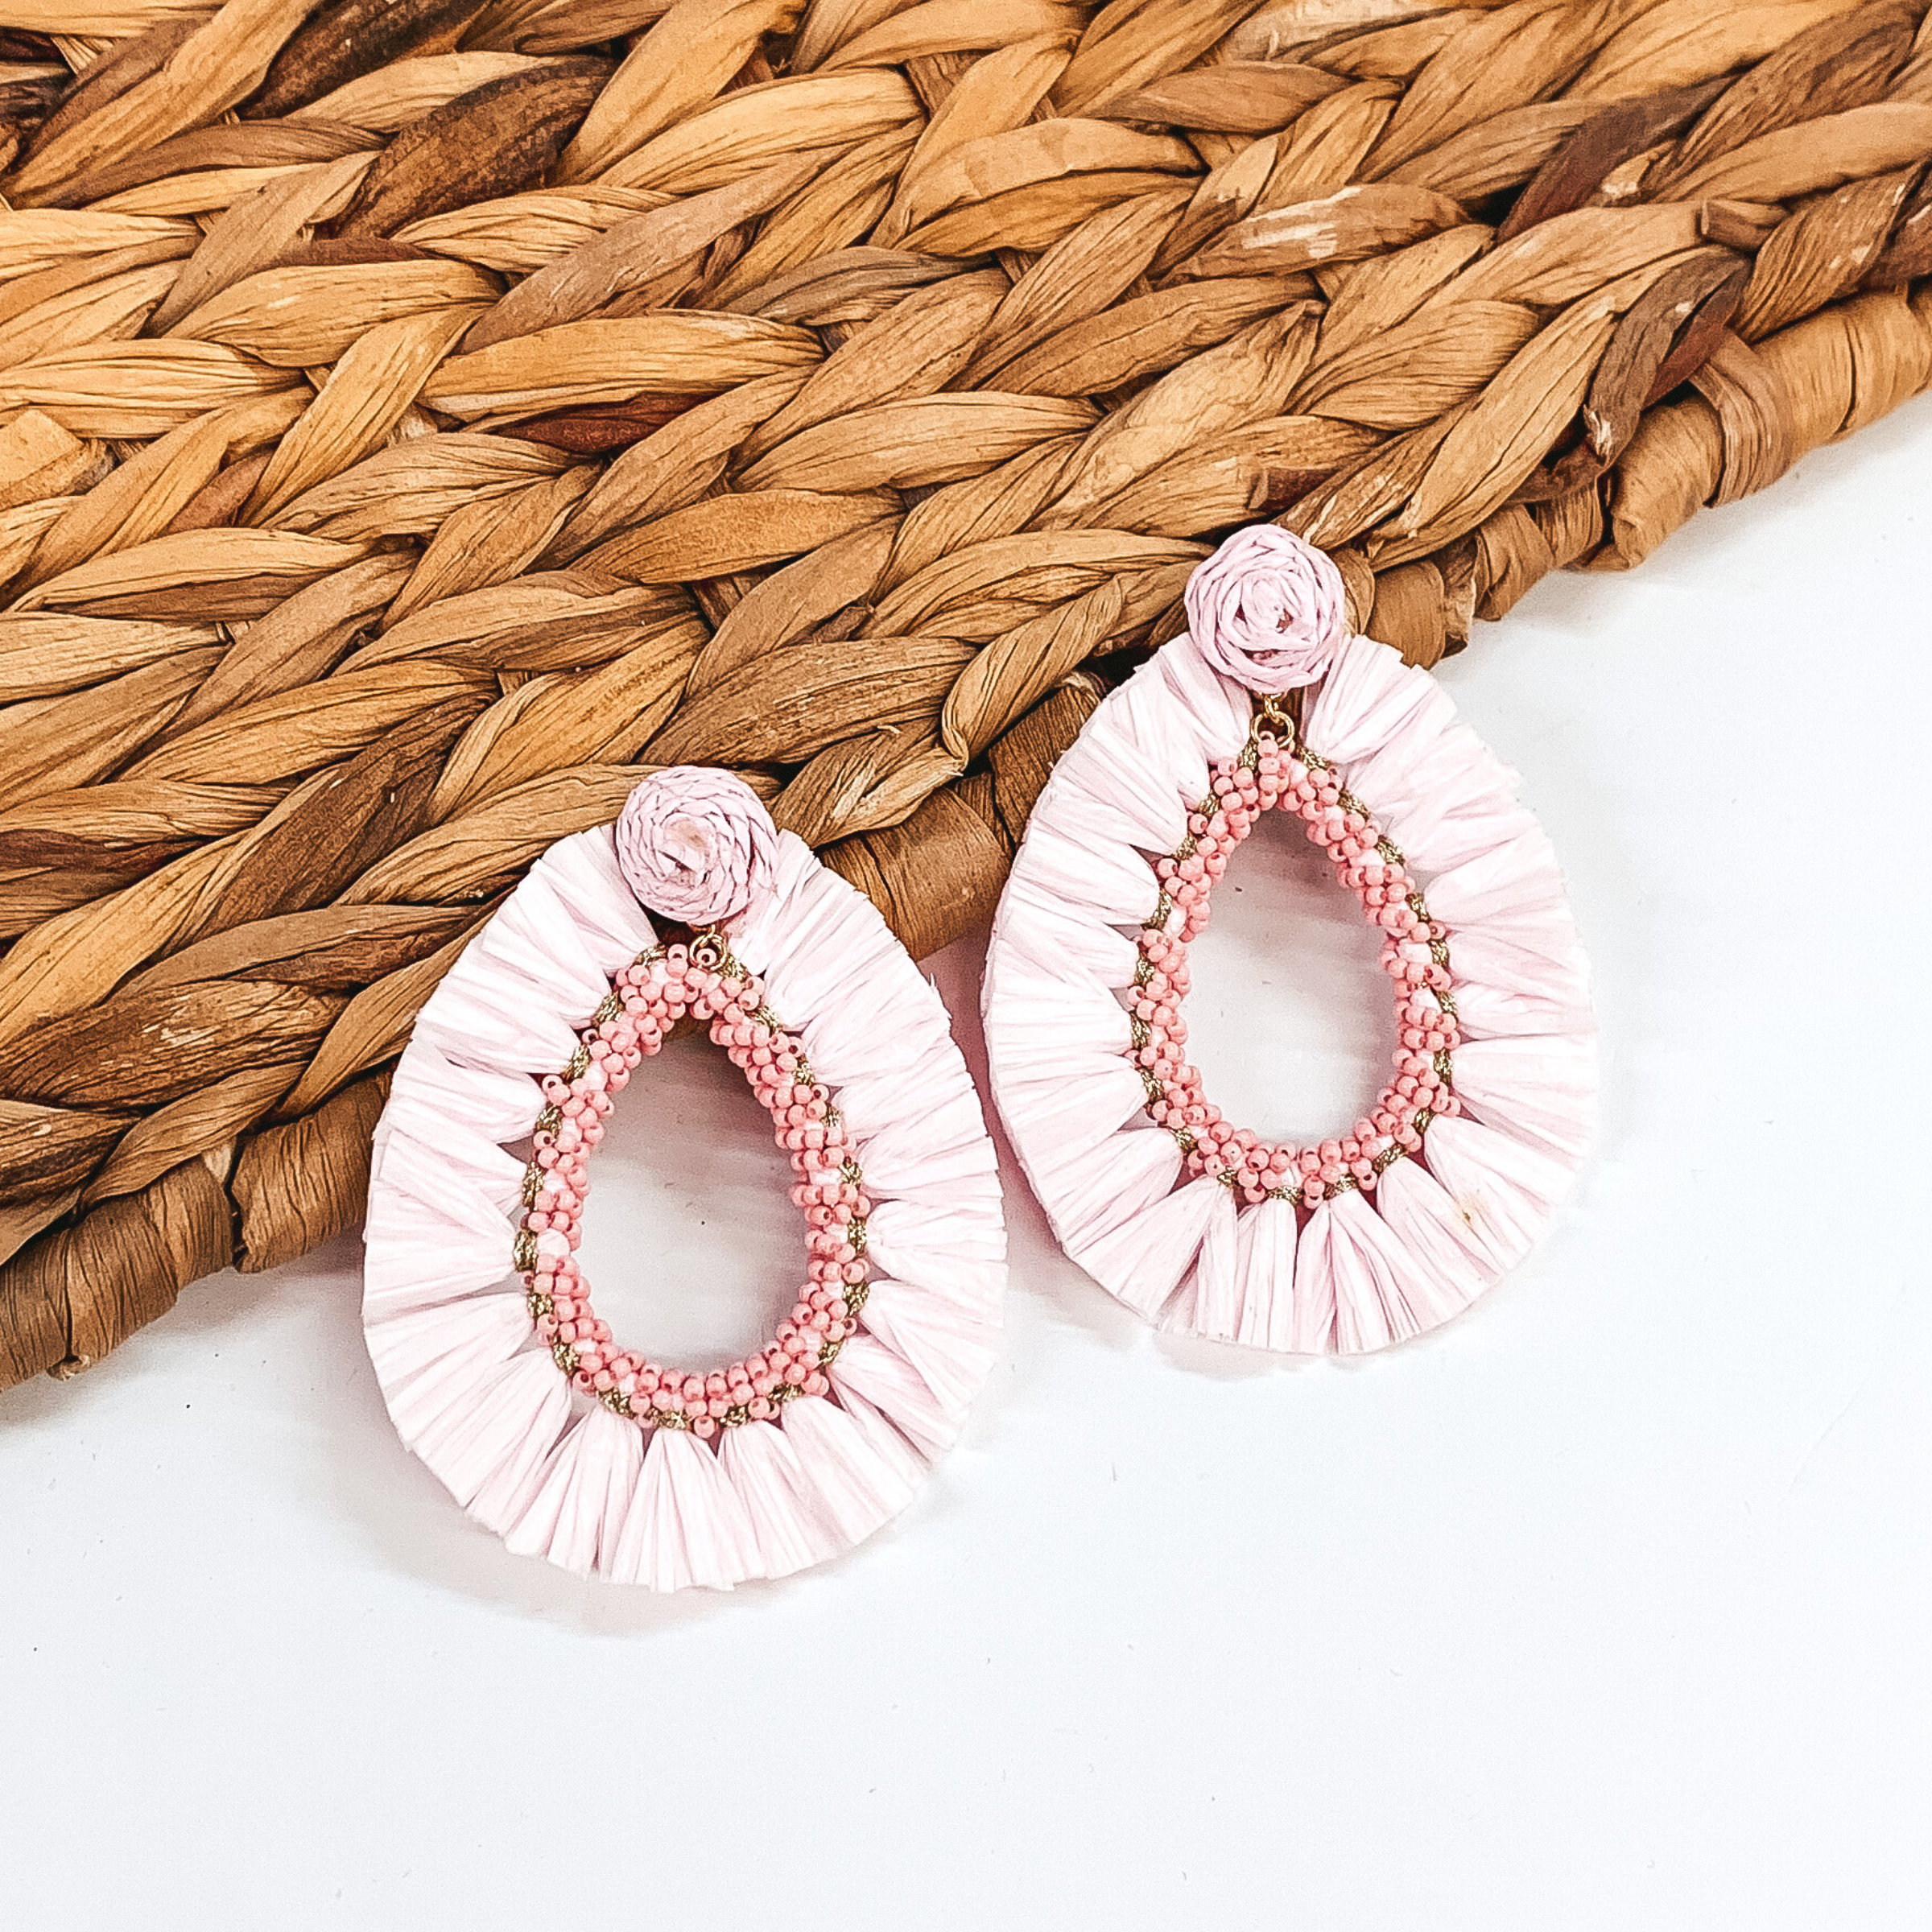 Circle beaded earrings with a hanging open teardrop pendant. The pendant is a beaded teardrop with raffia wrapped around the edges. The earrings are baby pink colored. These earrings are pictured on a white backround while partially laying on a tan woven material. 